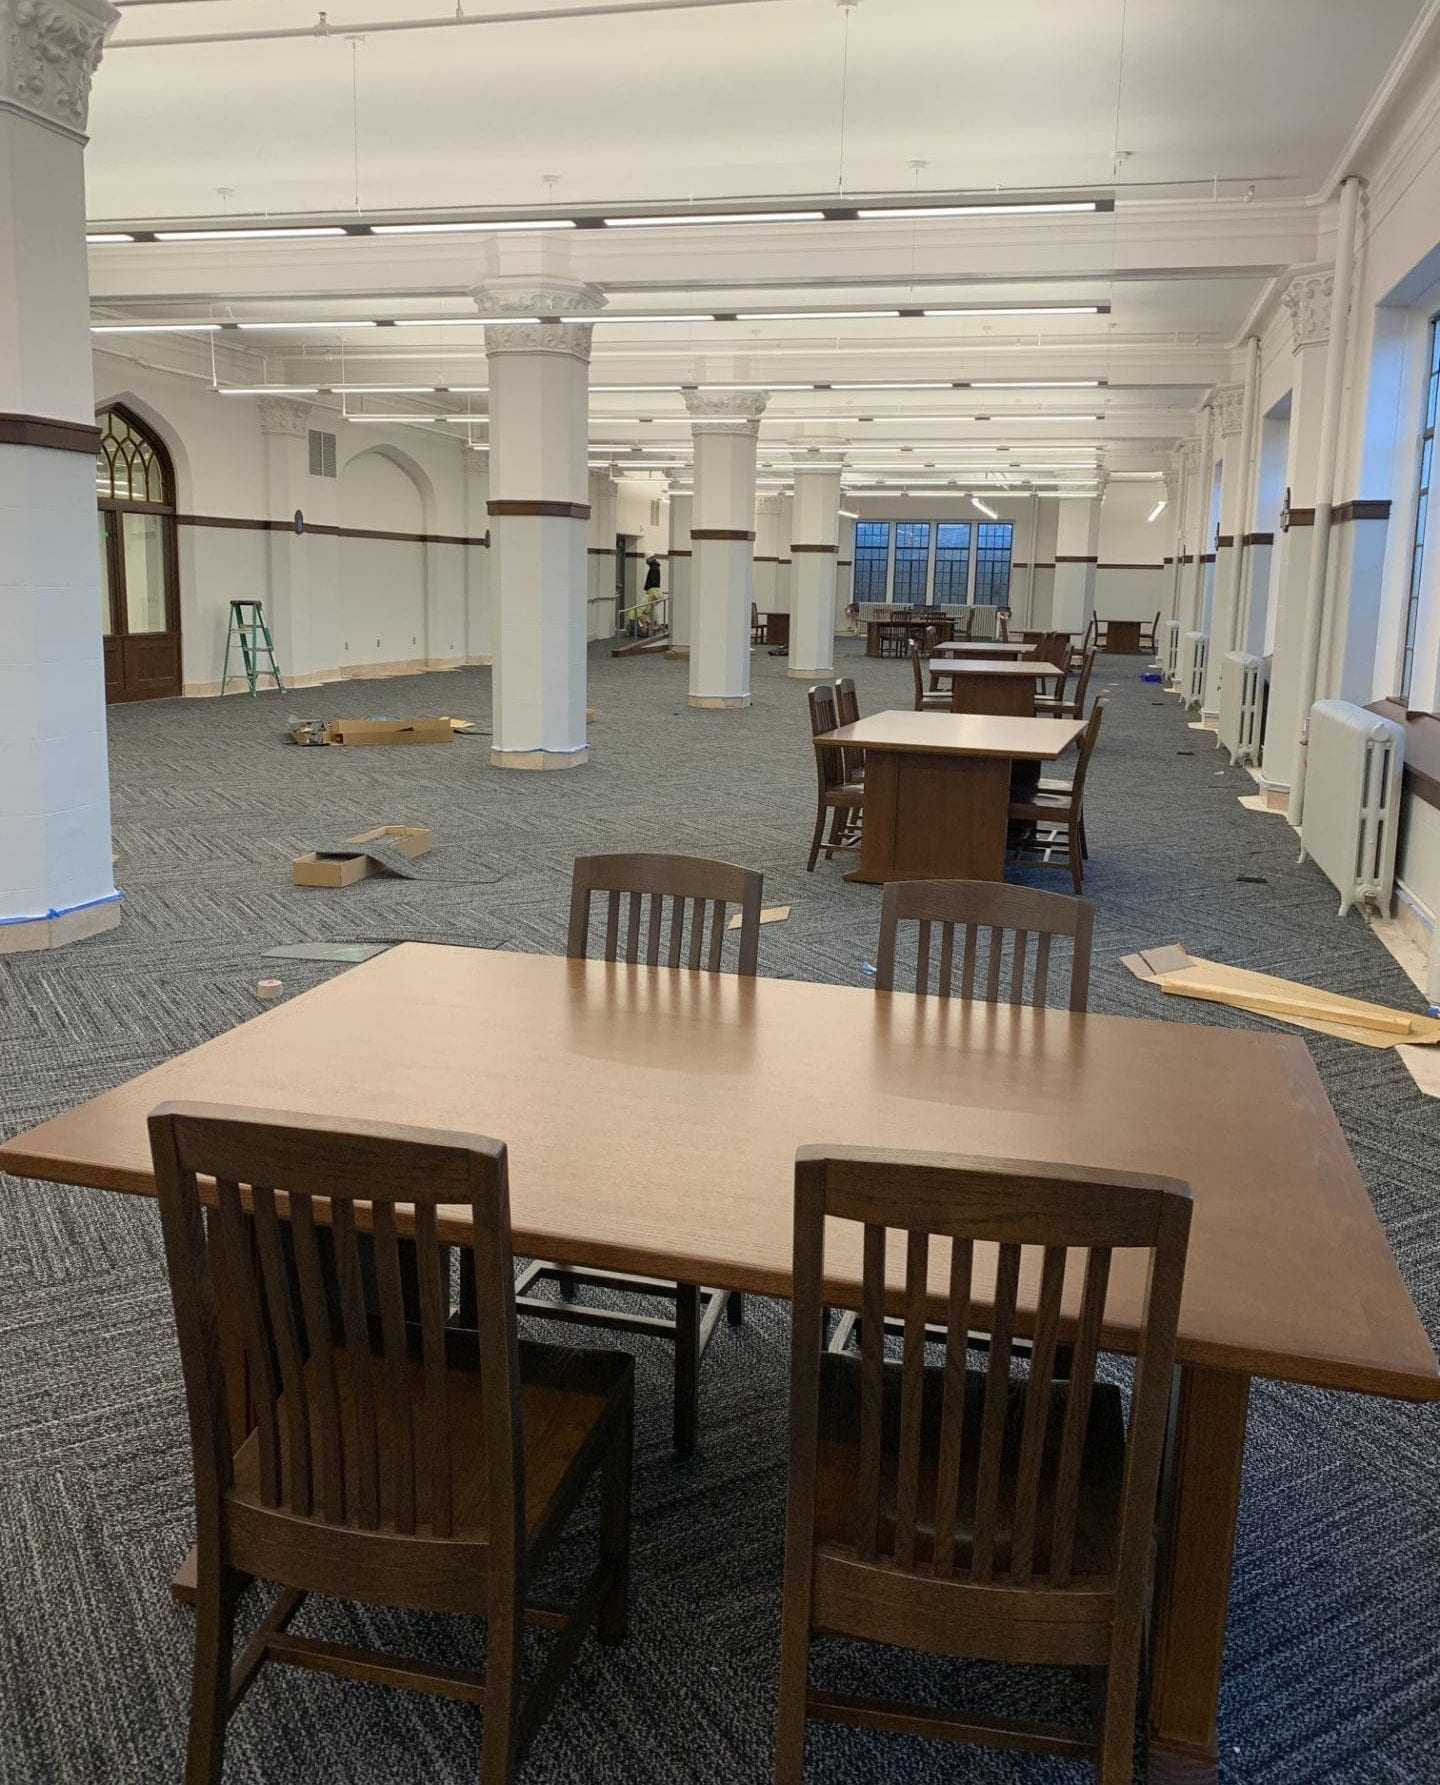 A few tables and chairs sit in an empty reading room.